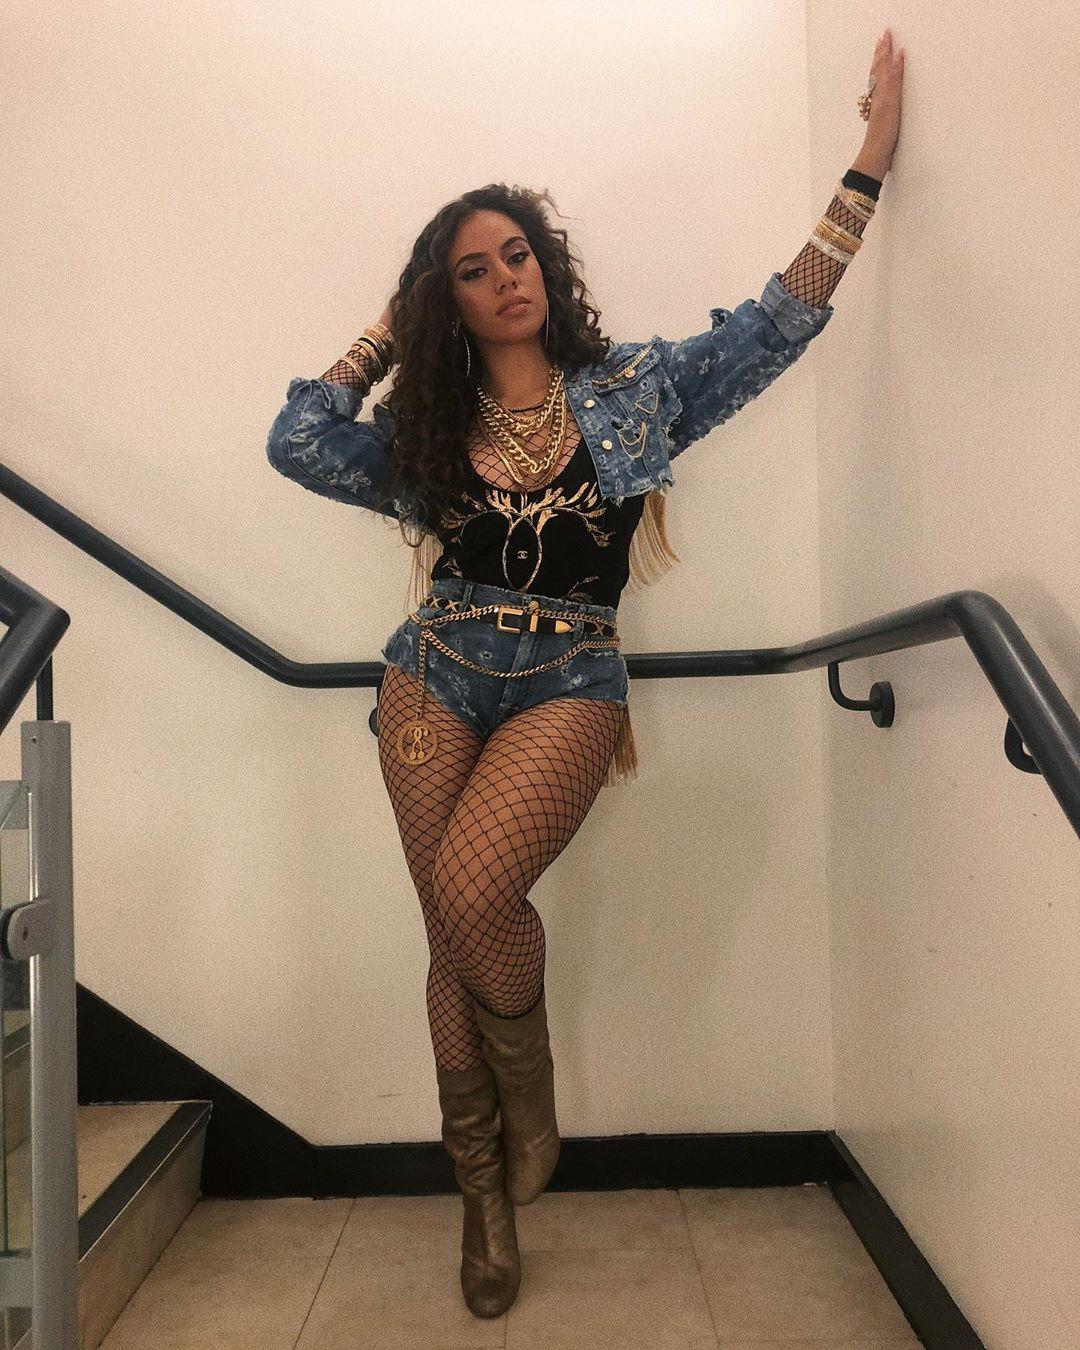 51 Hot Pictures Of Dinah Jane That Will Make Your Heart Pound For Her 4